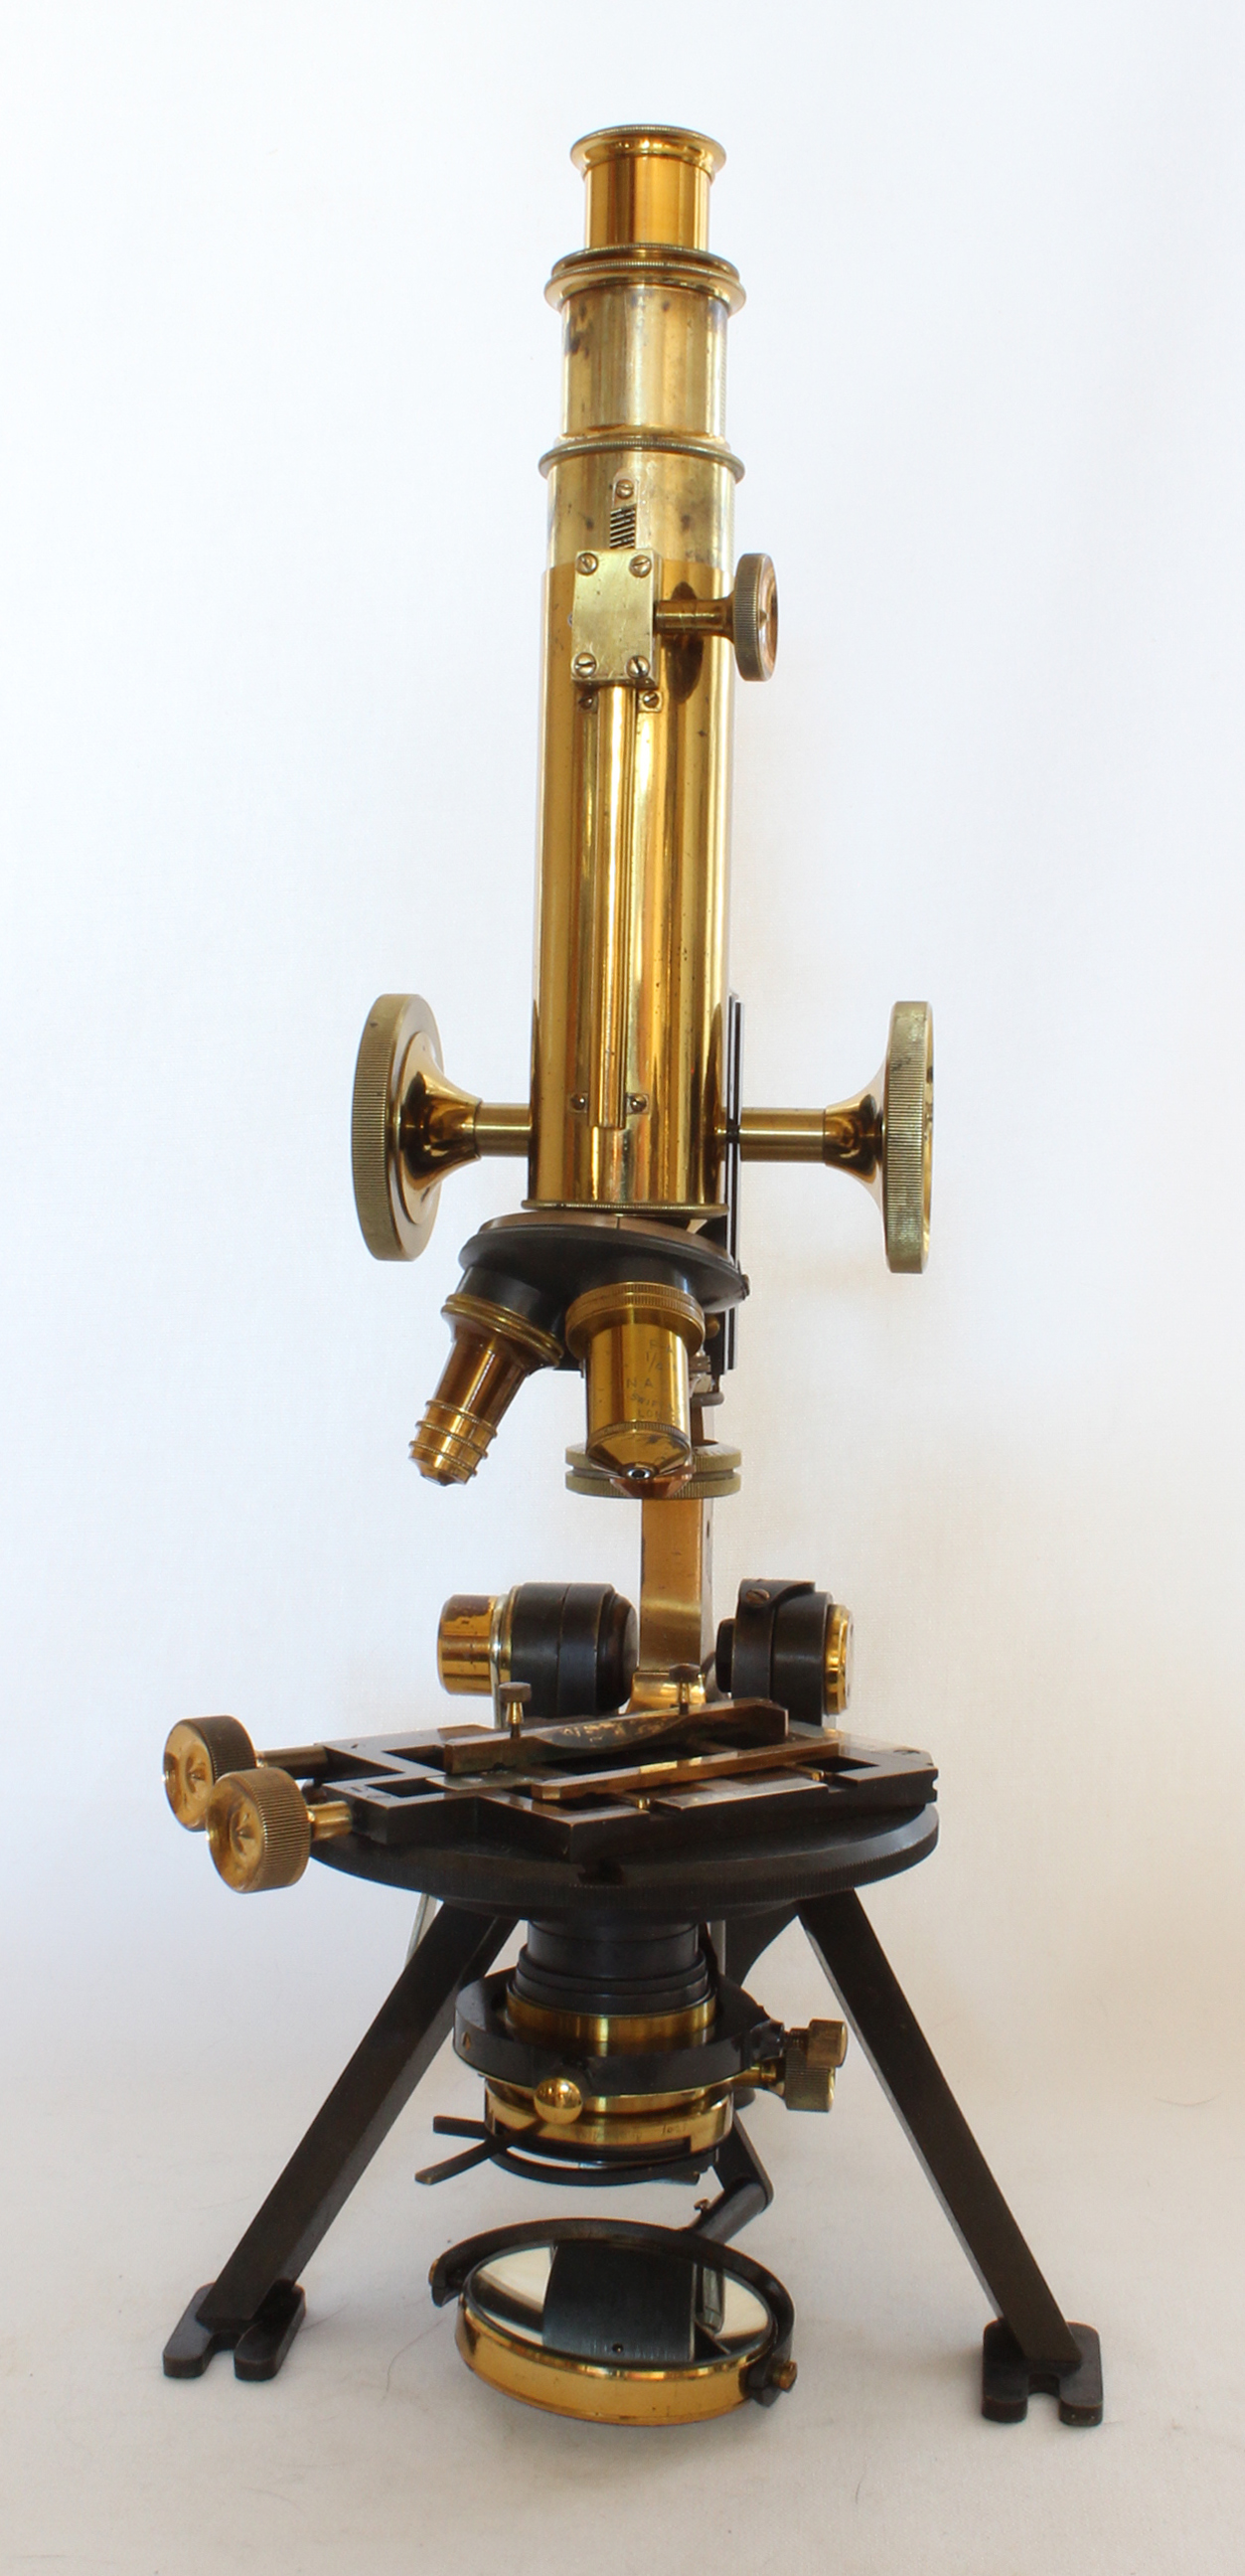 Nelson-Curties Microscope front